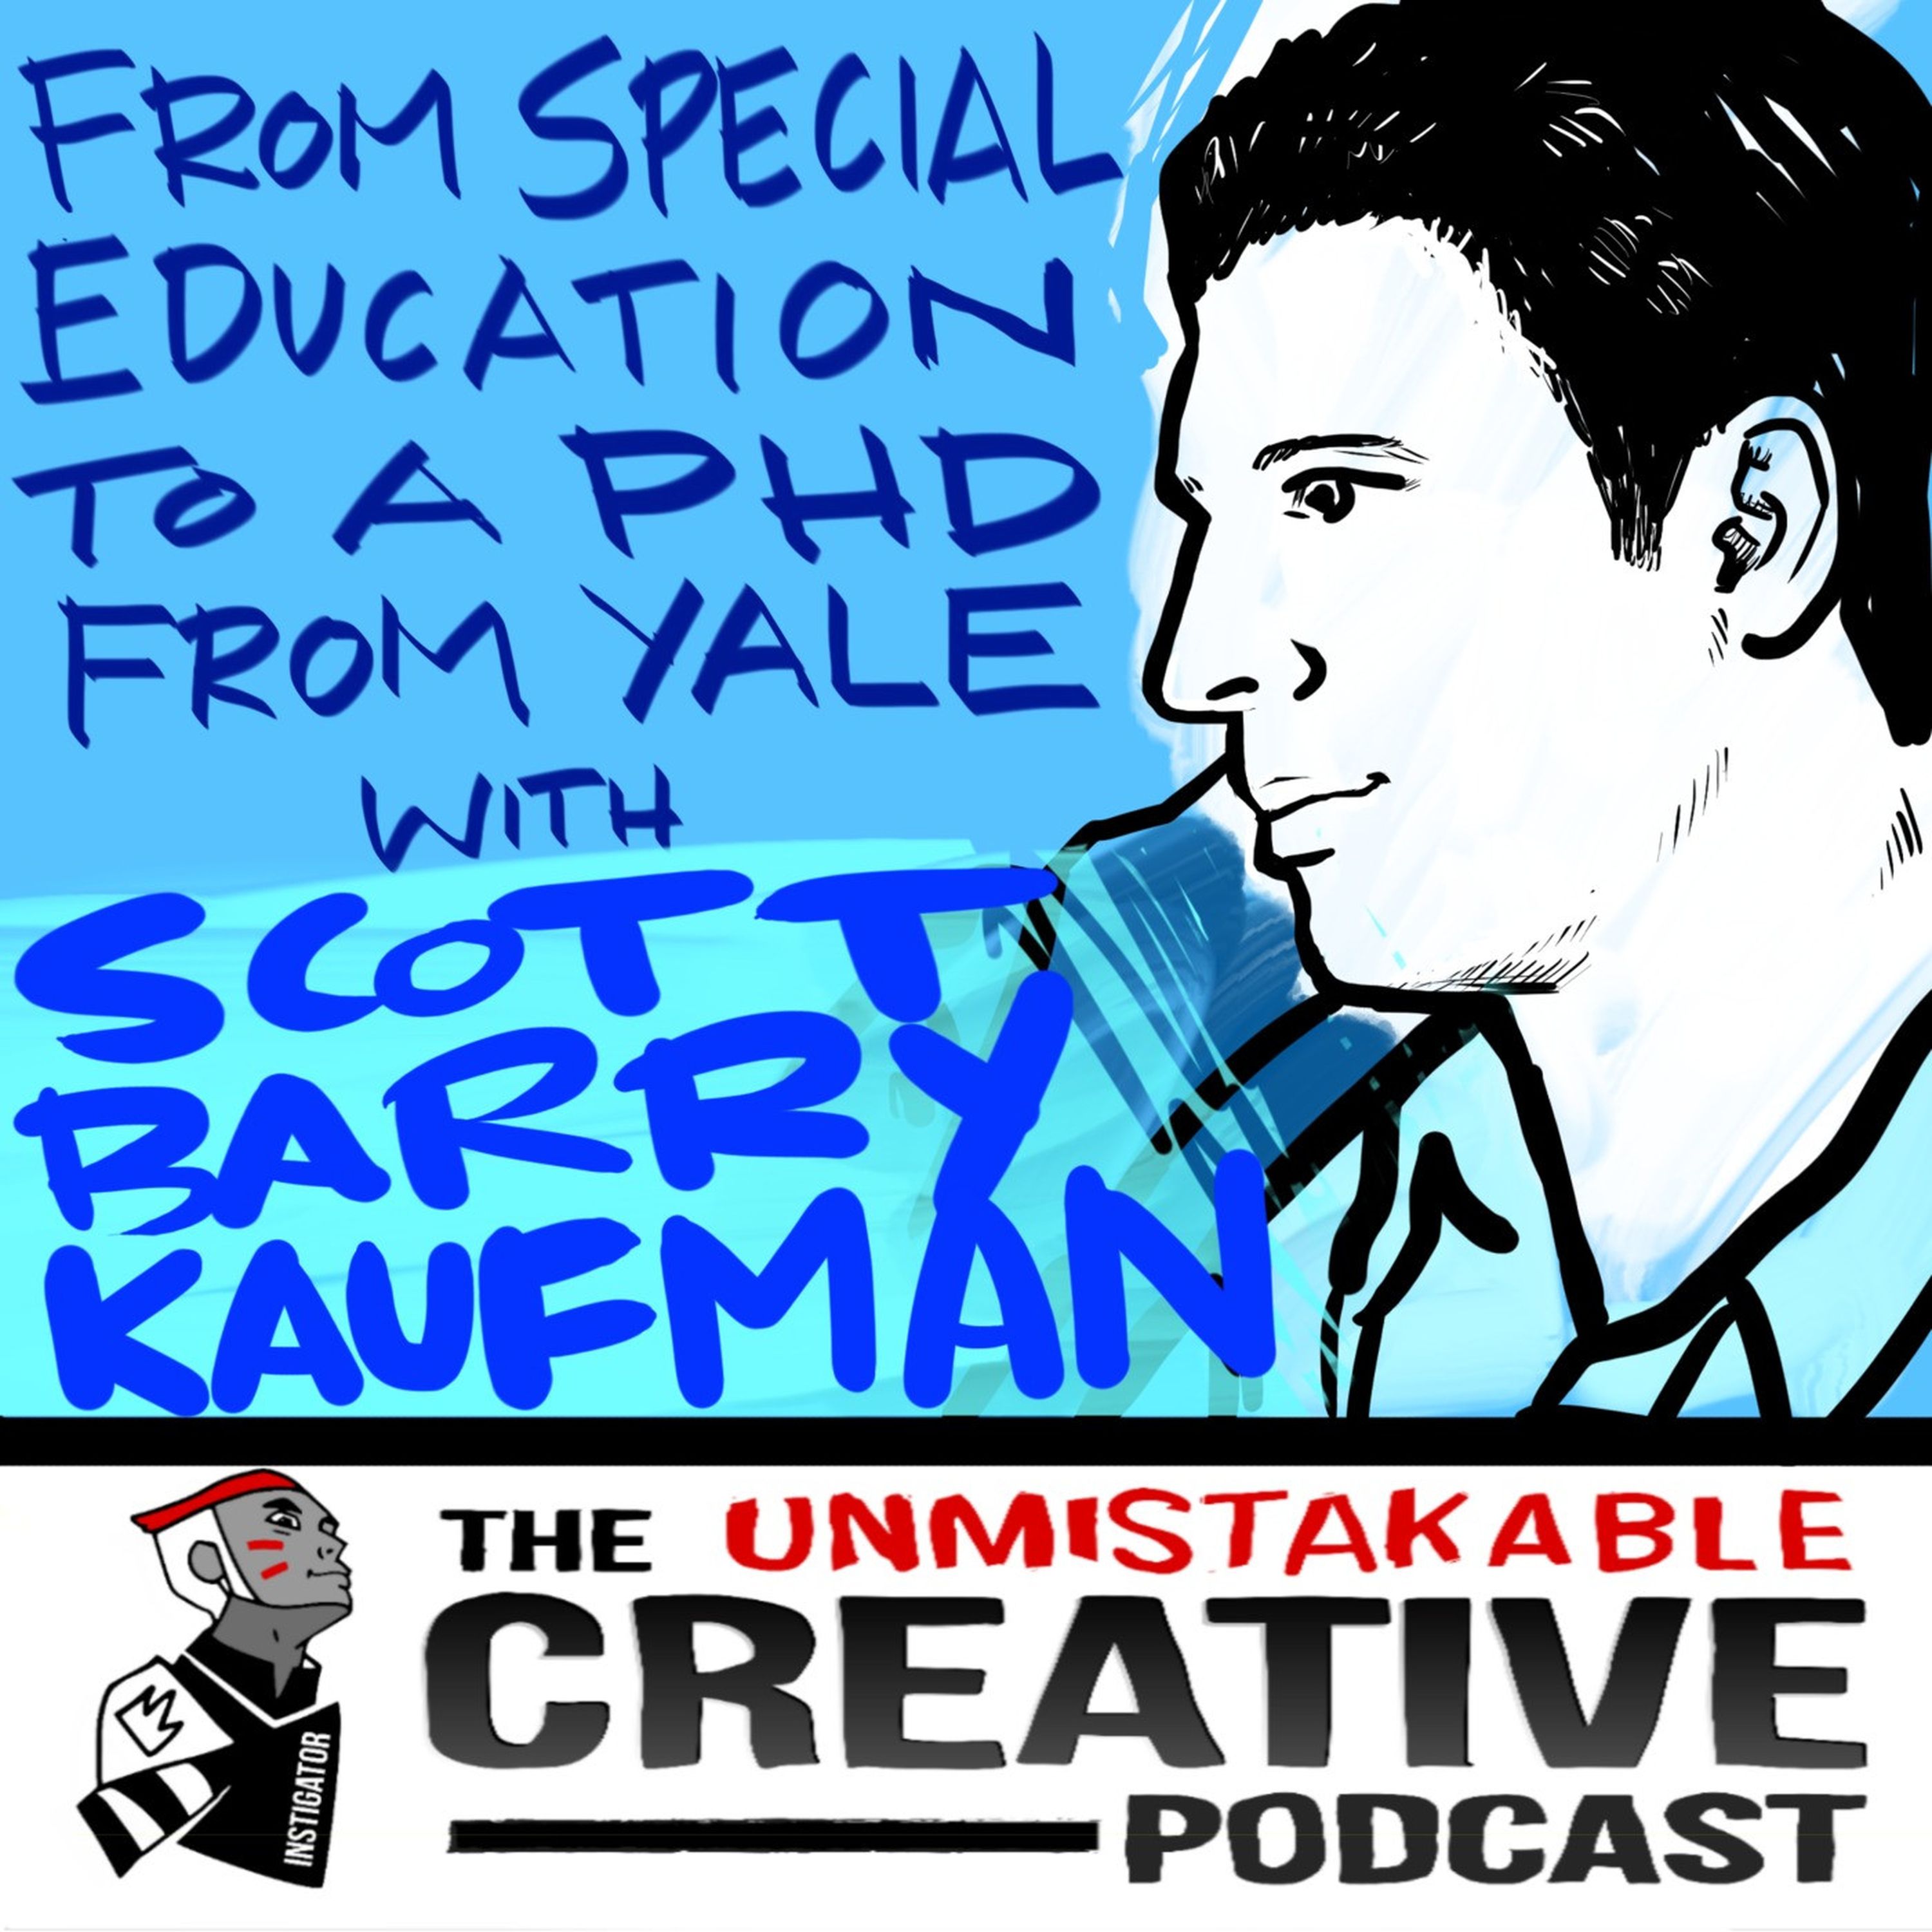 From Special Education to a PHD at Yale with Scott Barry Kaufman Image